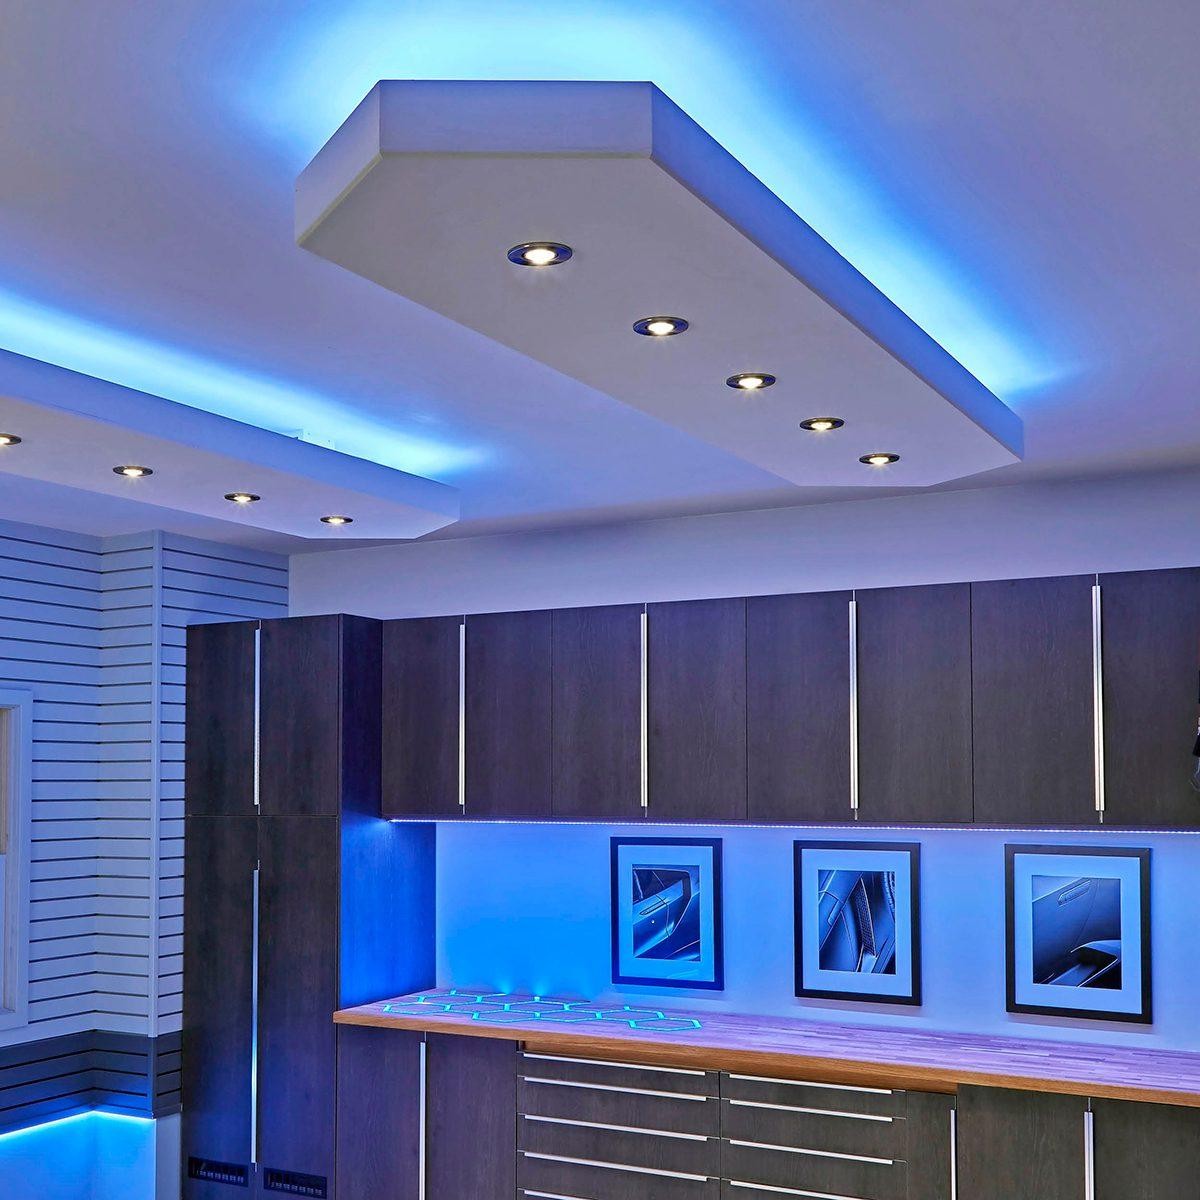 An Overview of LED Module Technology and Design for Home Appliance